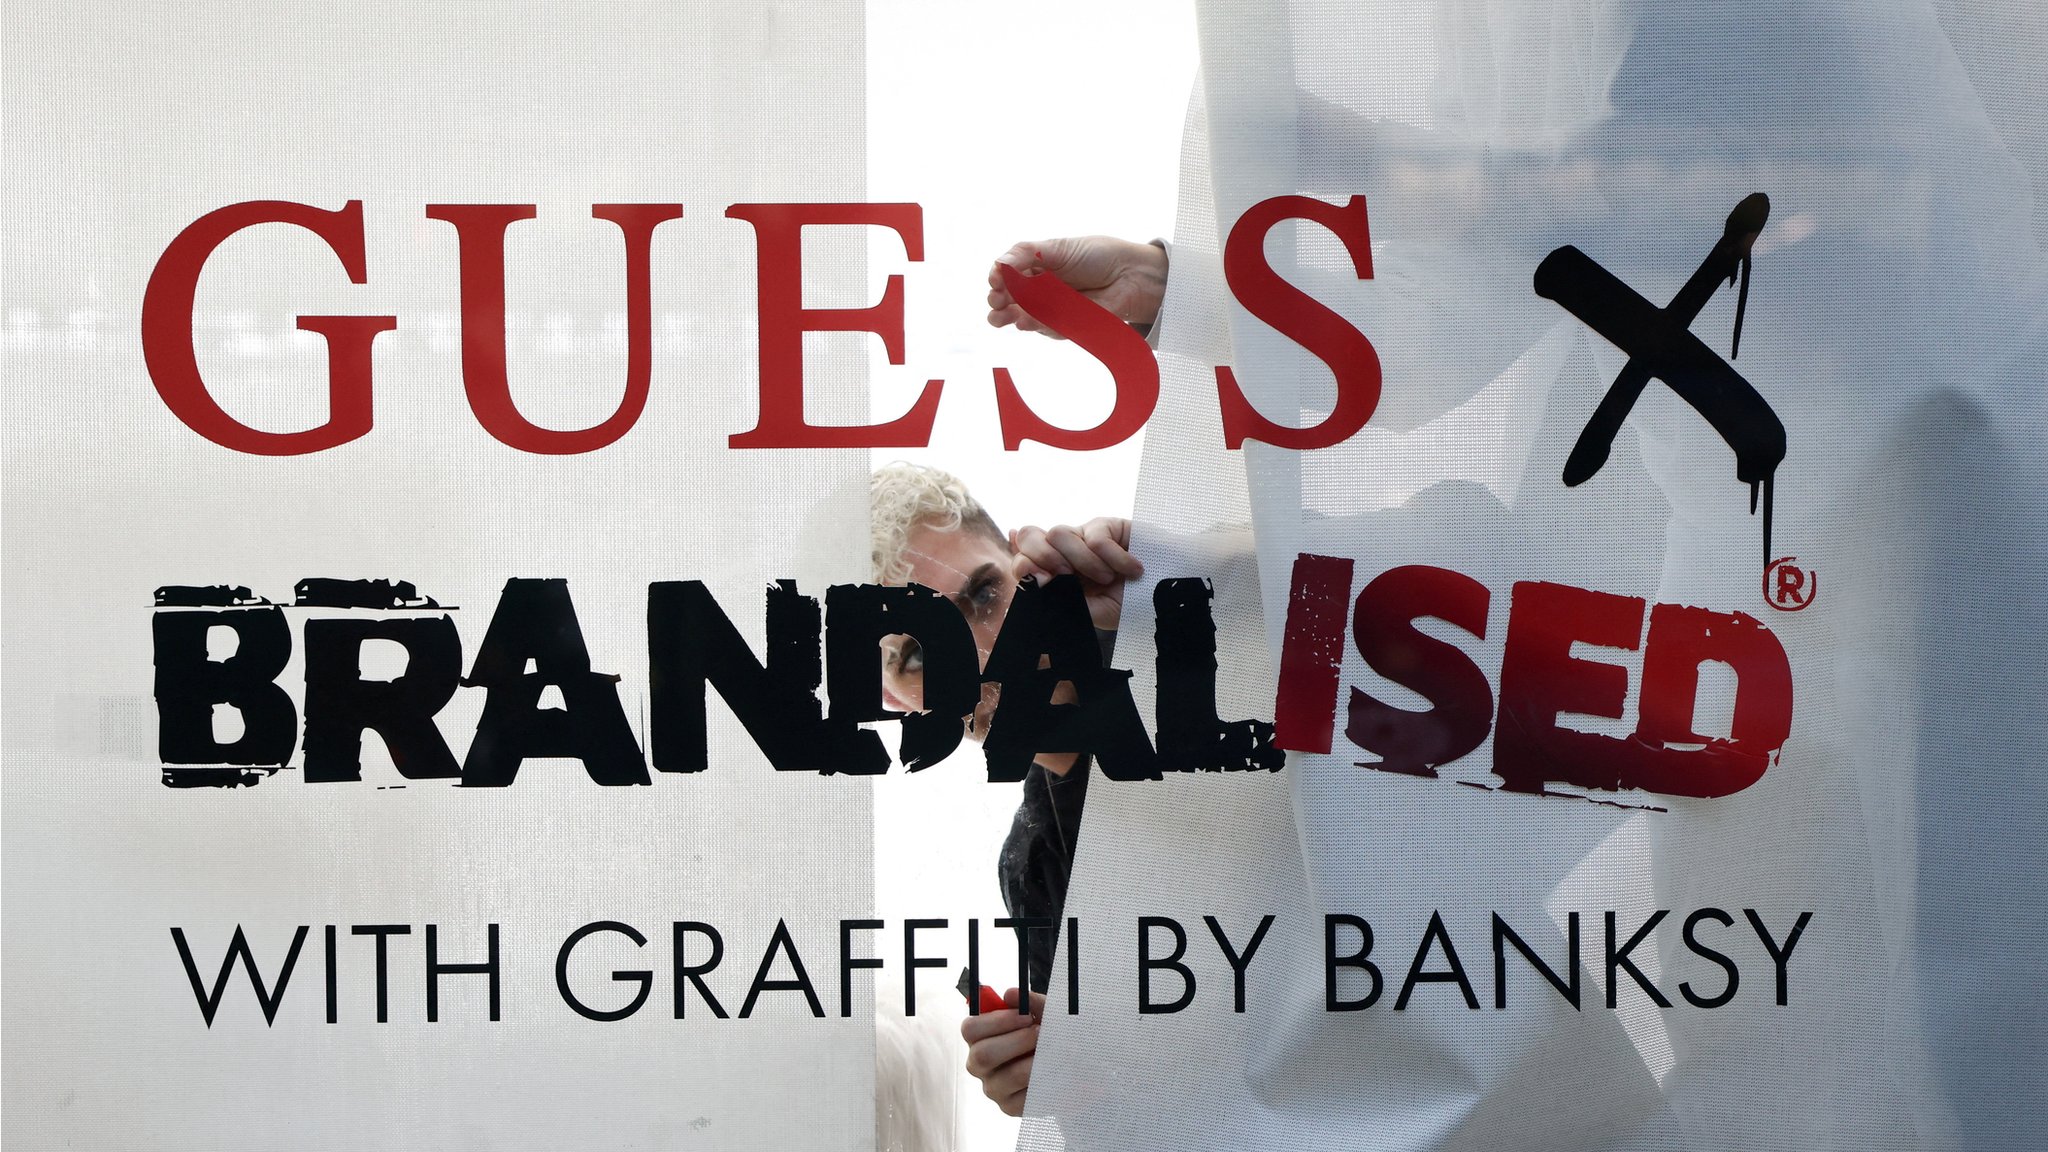 Banksy accuses clothing brand Guess of 'helping themselves' to his artworks  - BBC News